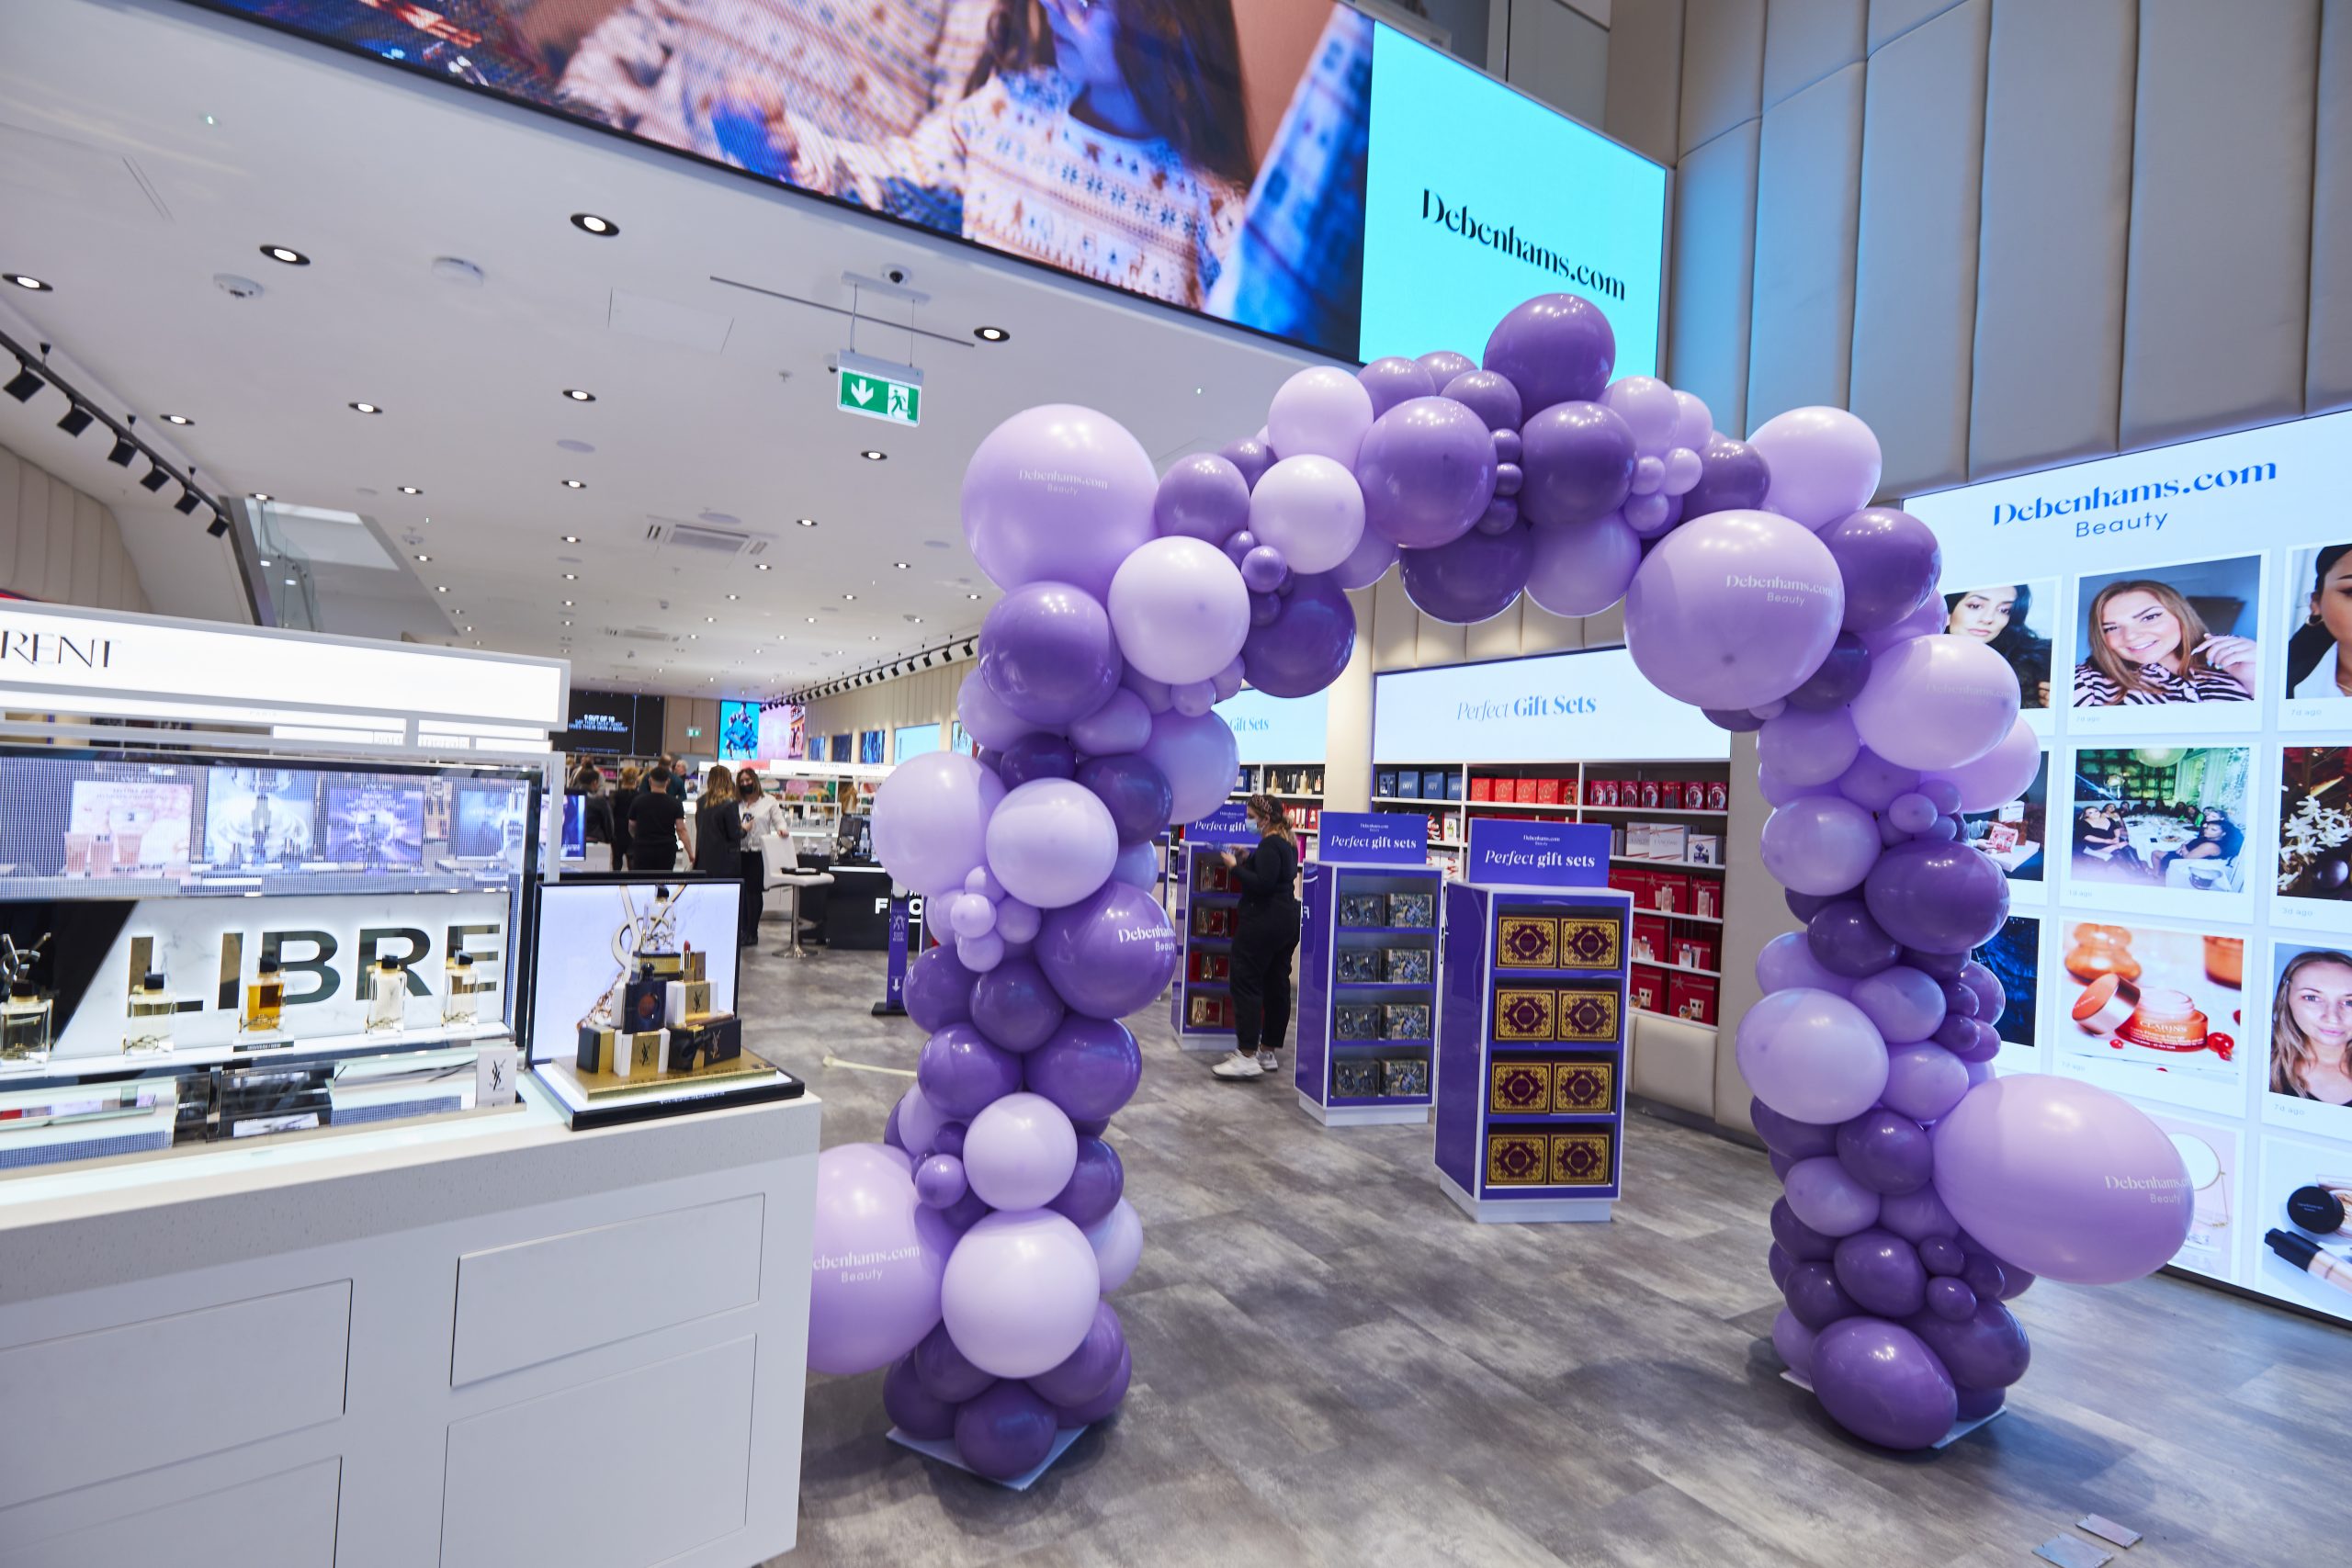 Debenhams reopens with new beauty store in Manchester